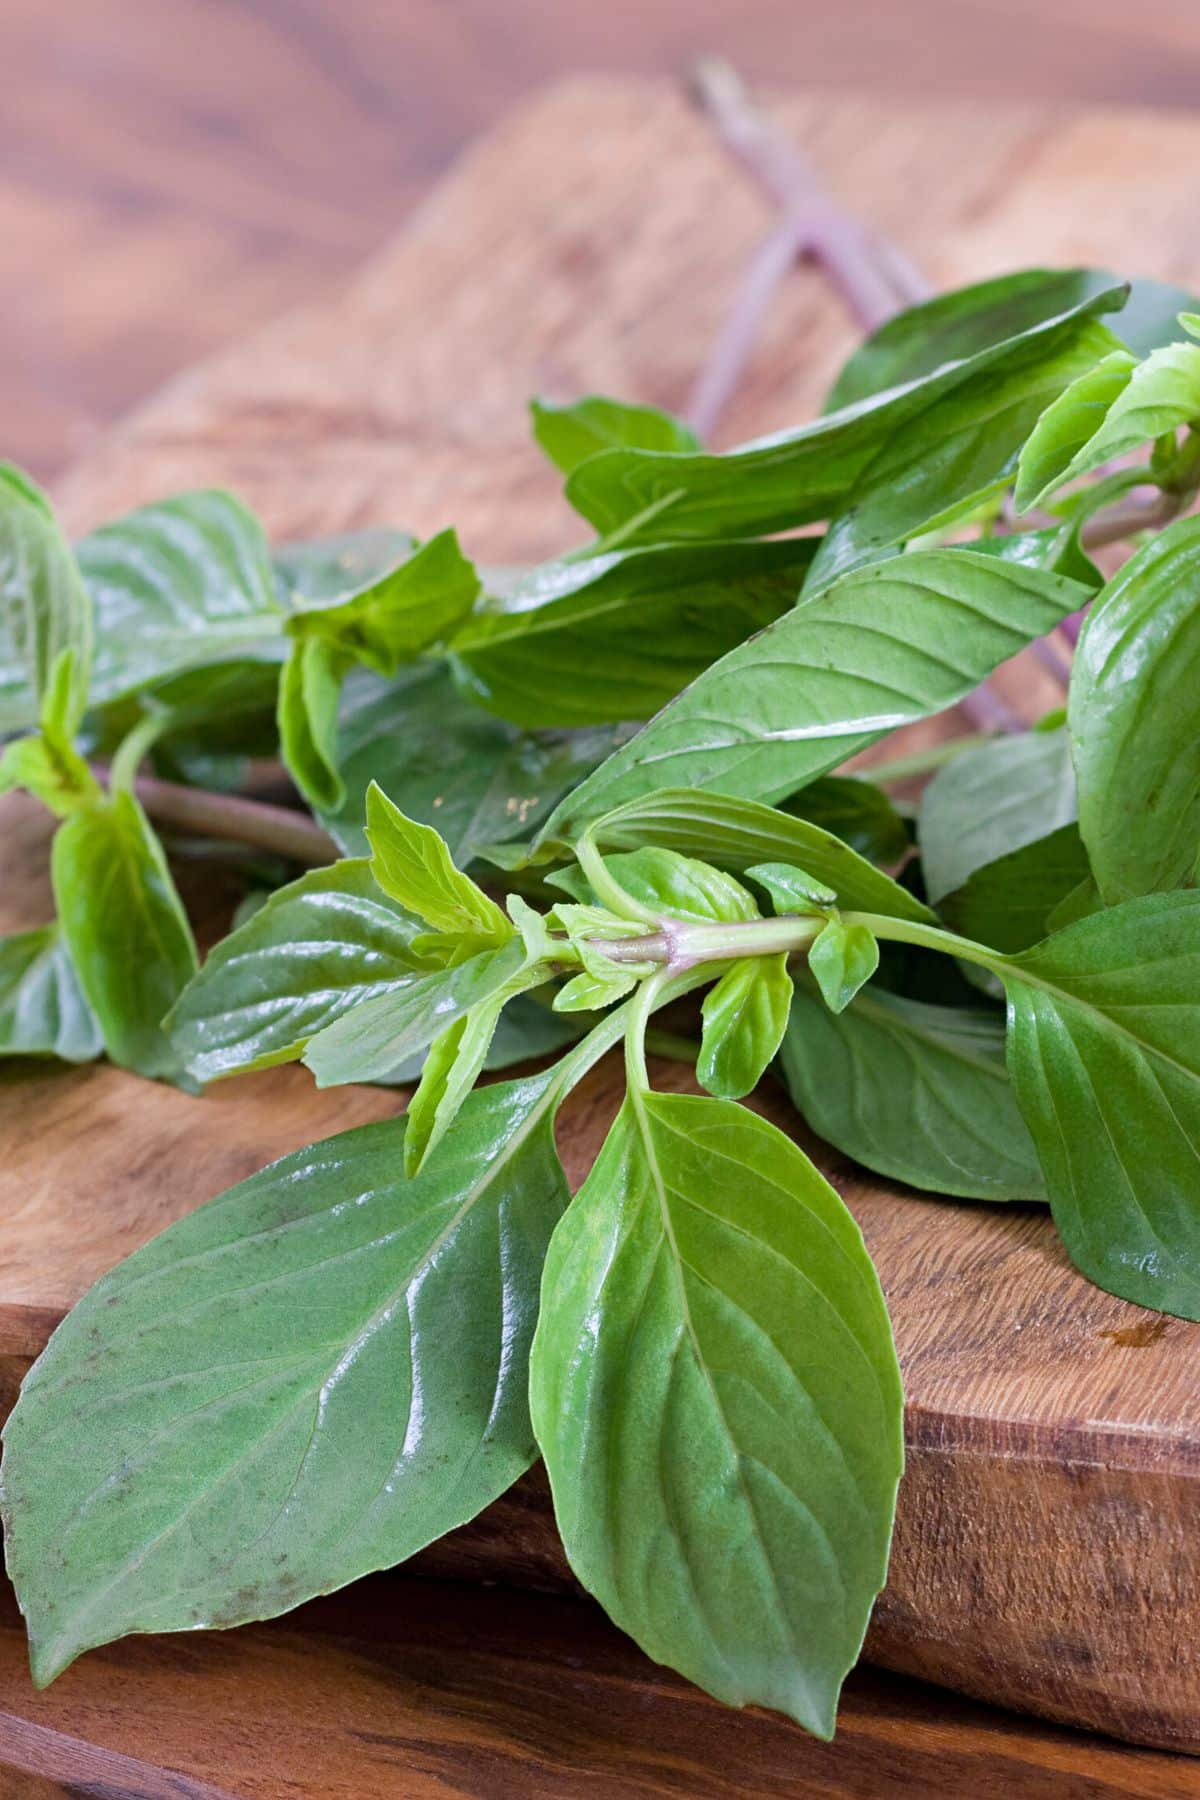 A bundle of fresh basil on a wooden table.